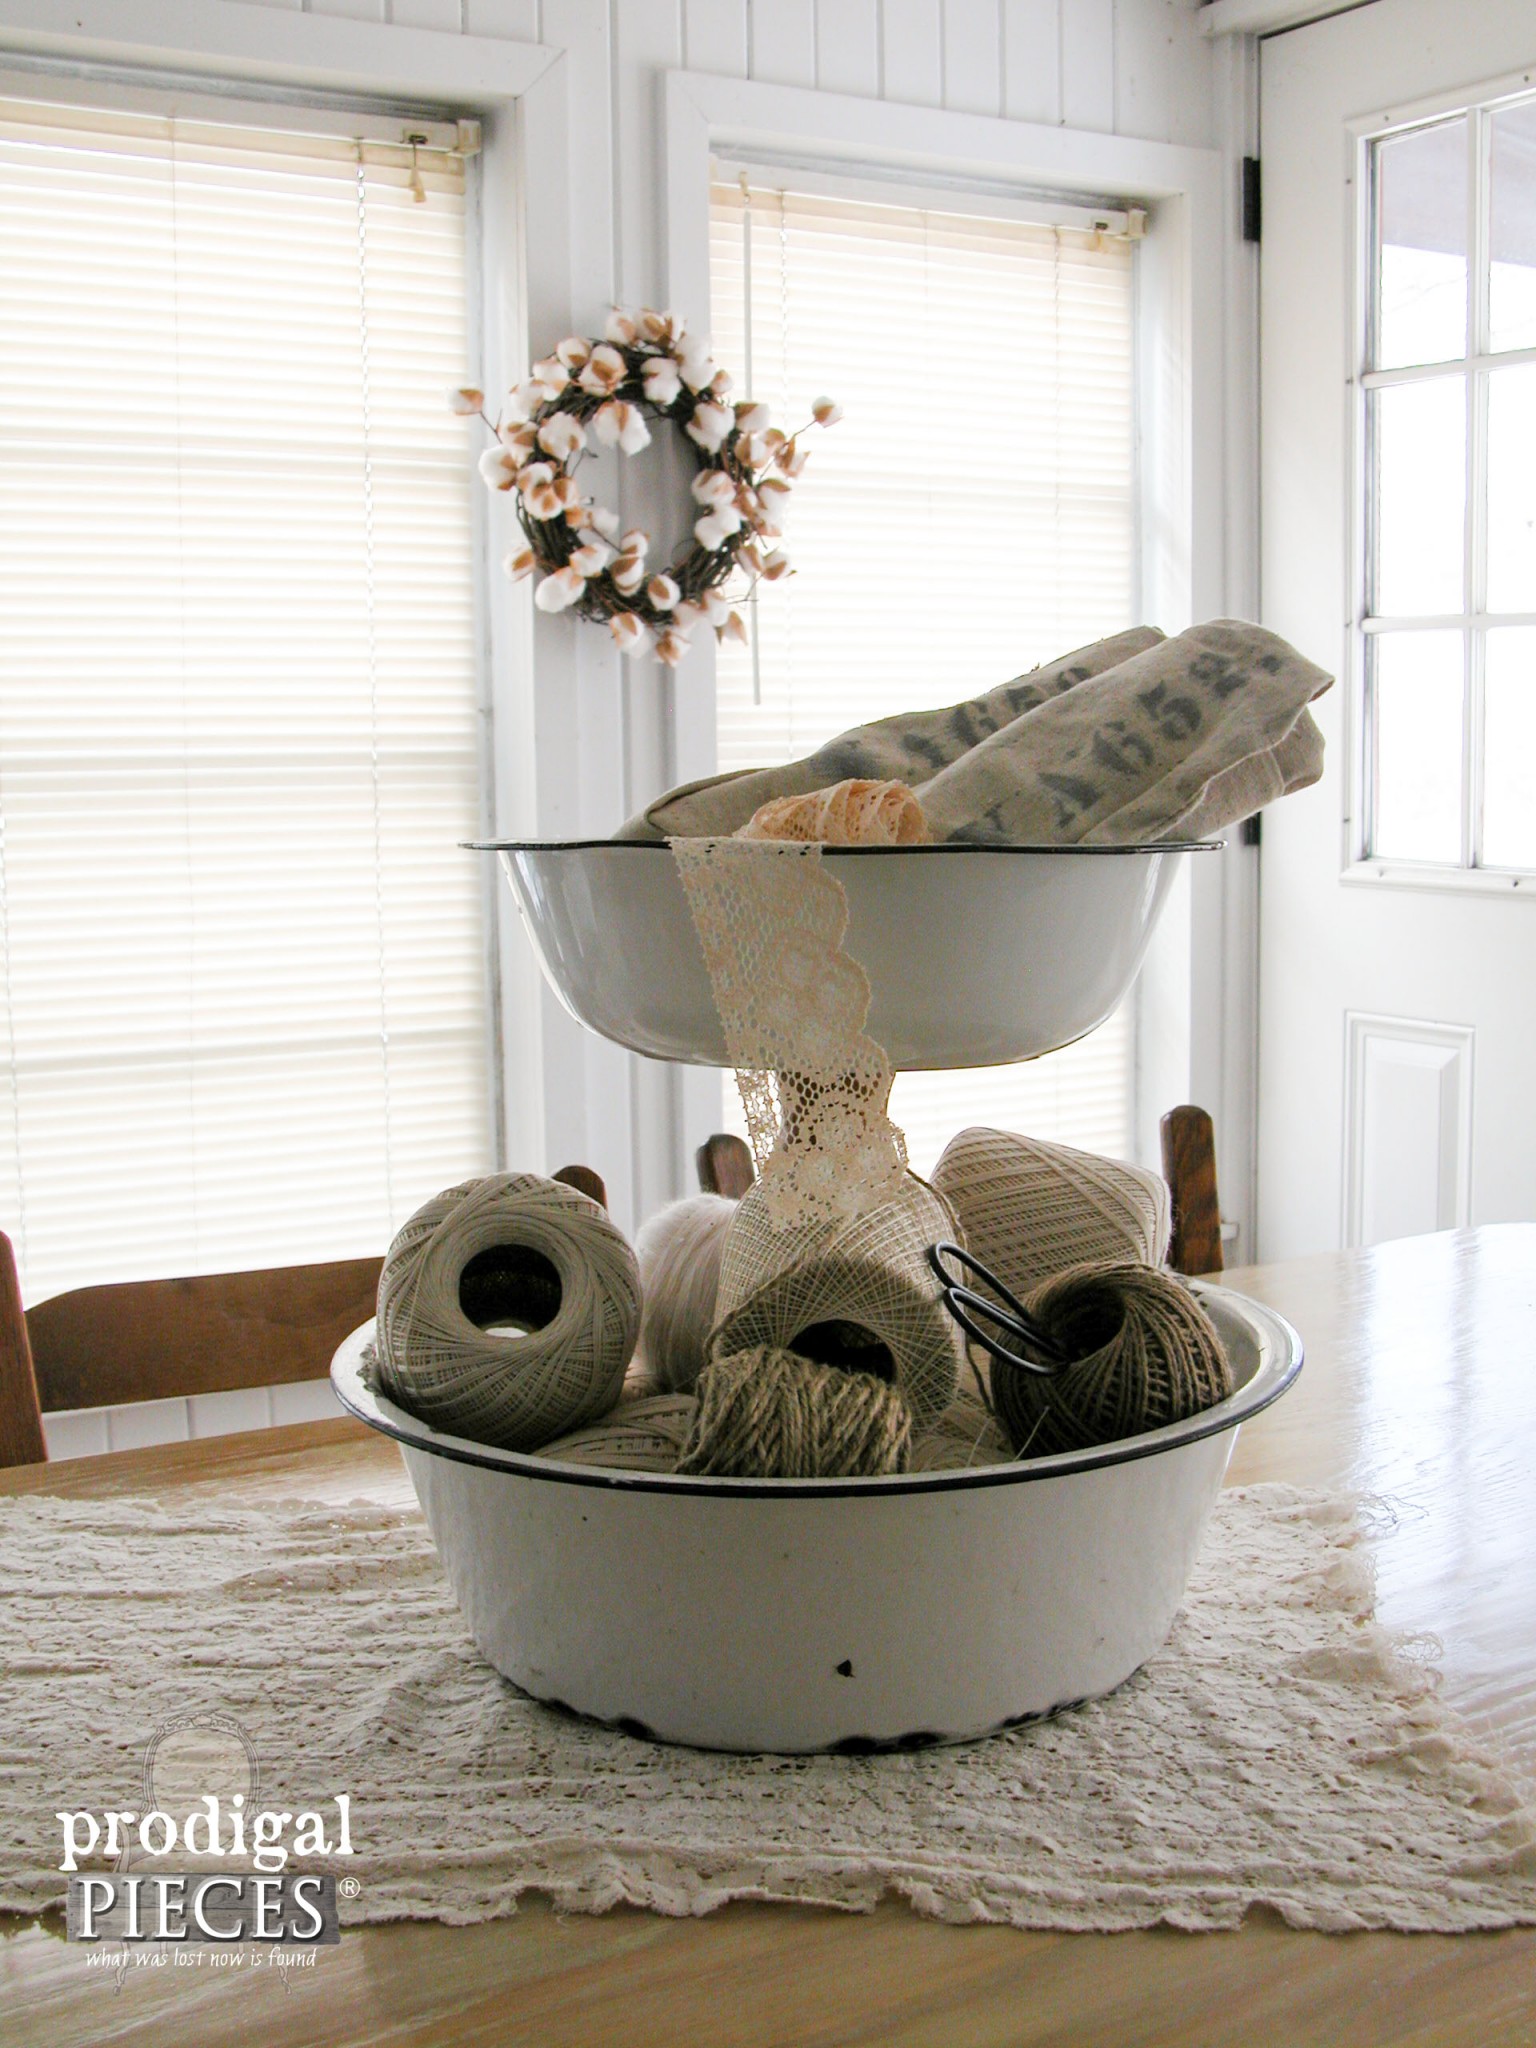 Upcycled Enamelware Basin Stand created by Prodigal Pieces | www.prodigalpieces.com